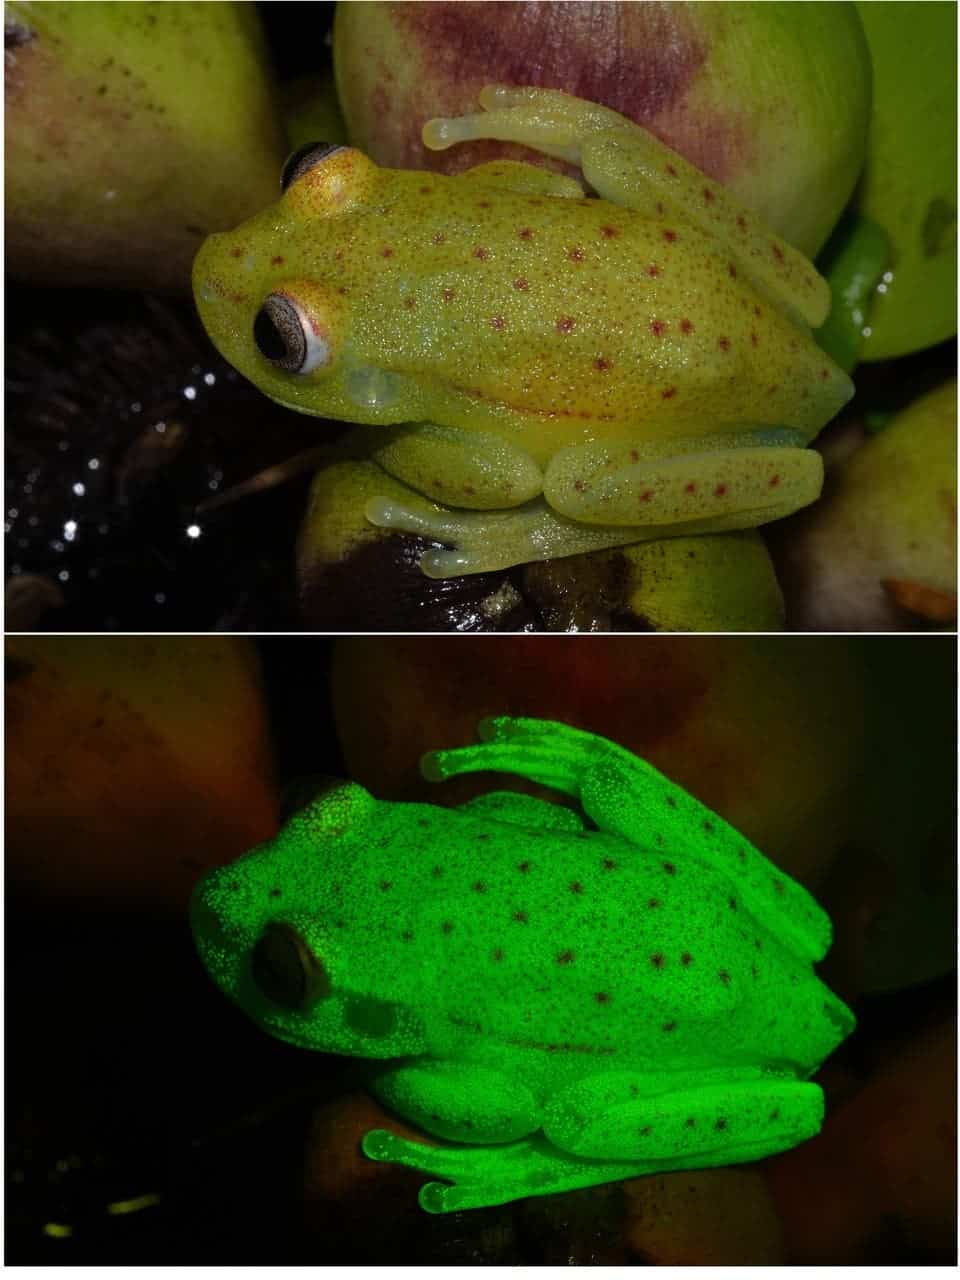 Top: with the naked eye. Bottom: with UV light. Image credits: Taboada, C. et al. Proc. Natl Acad. Sci. USA (2017)